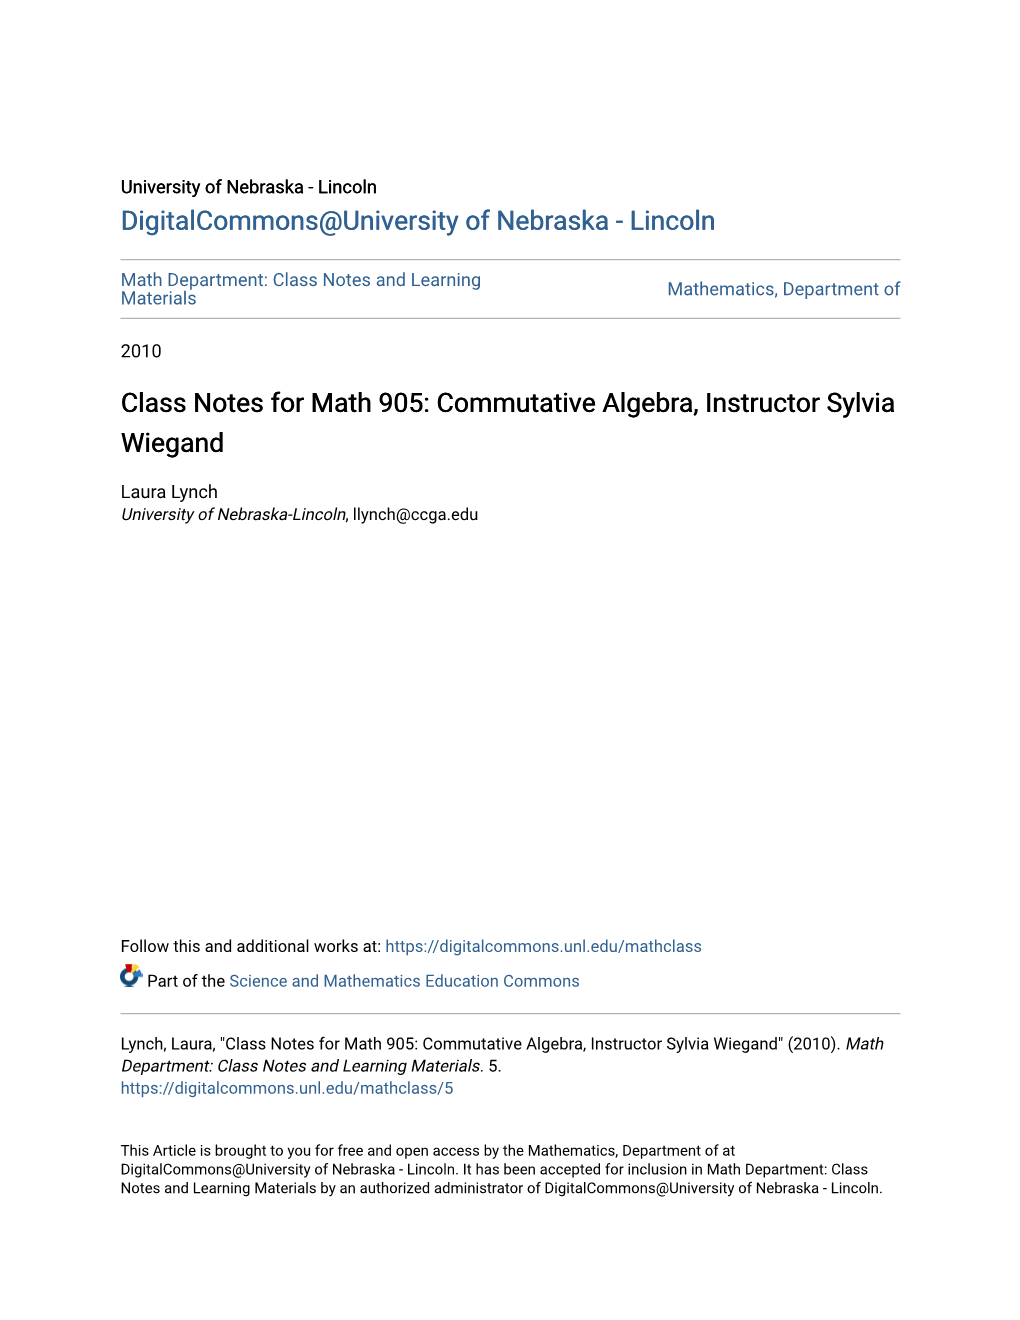 Class Notes for Math 905: Commutative Algebra, Instructor Sylvia Wiegand